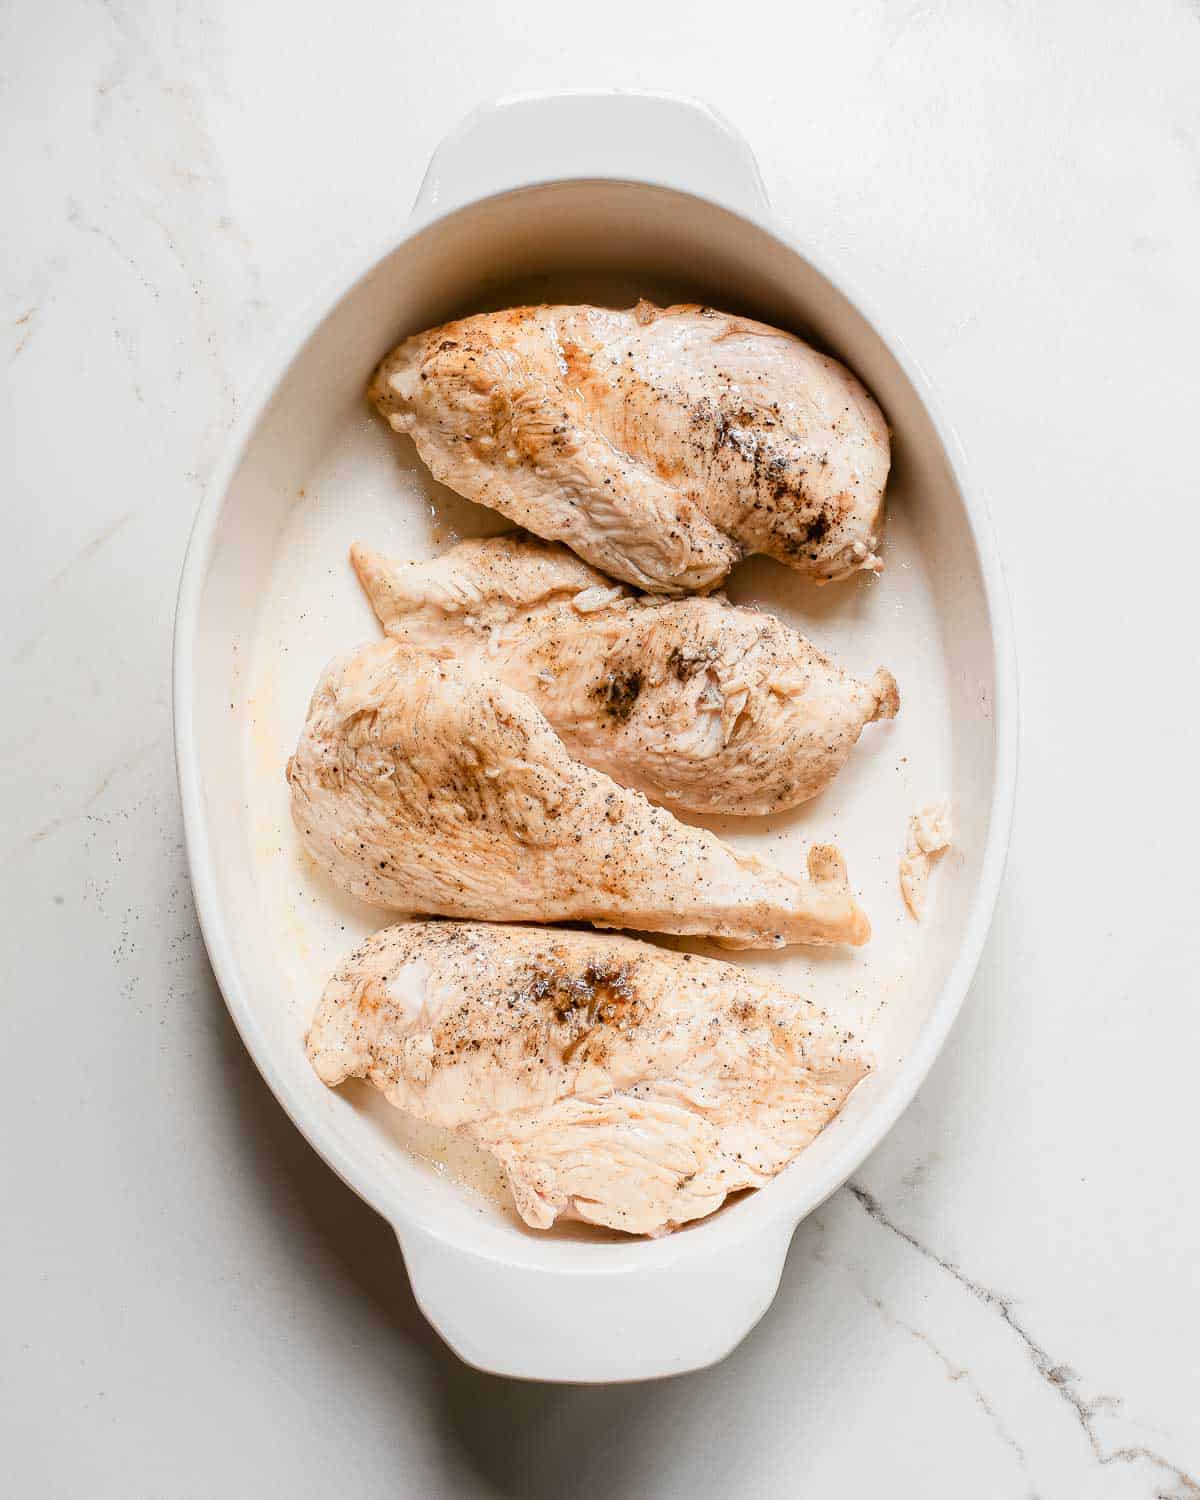 Seared chicken breasts in a white dish on a marble countertop.